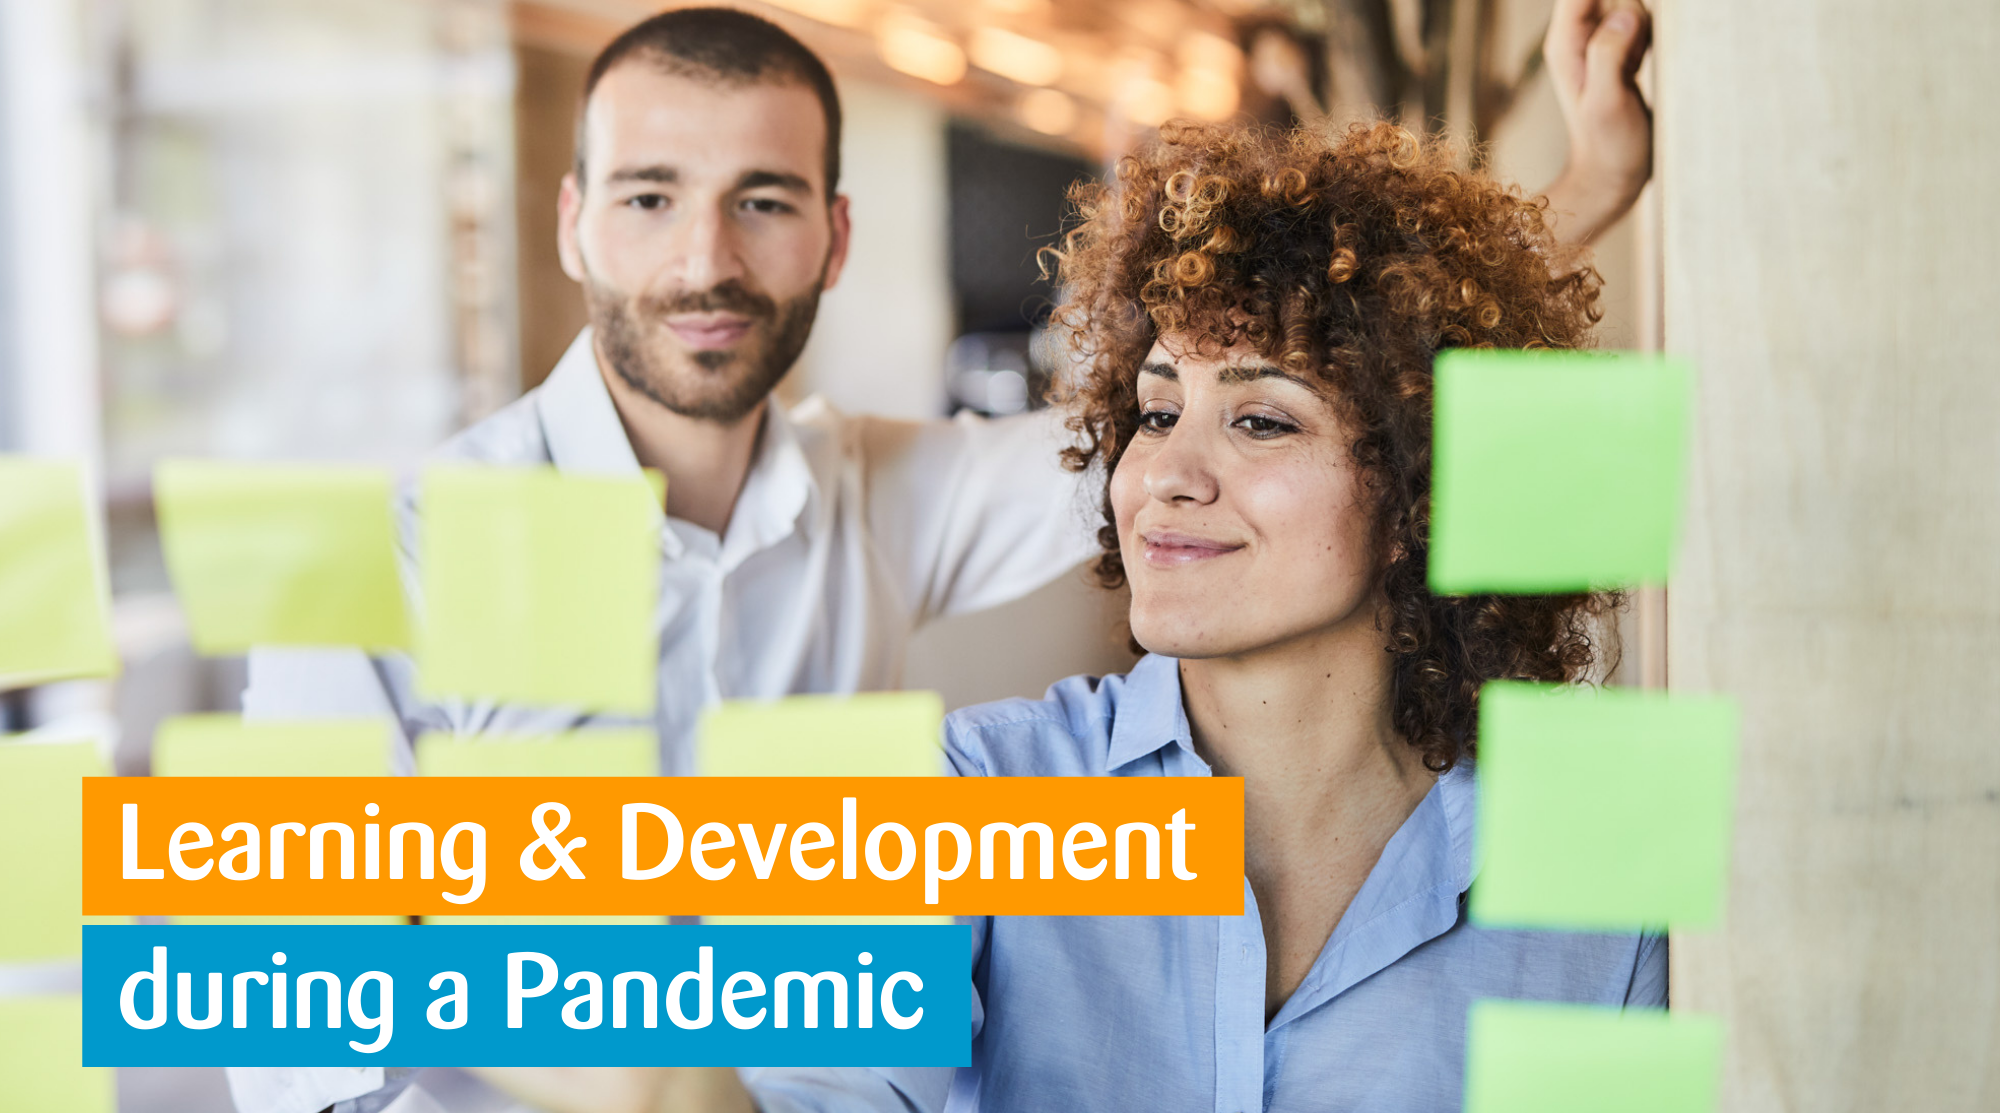 Training & Development during a Pandemic